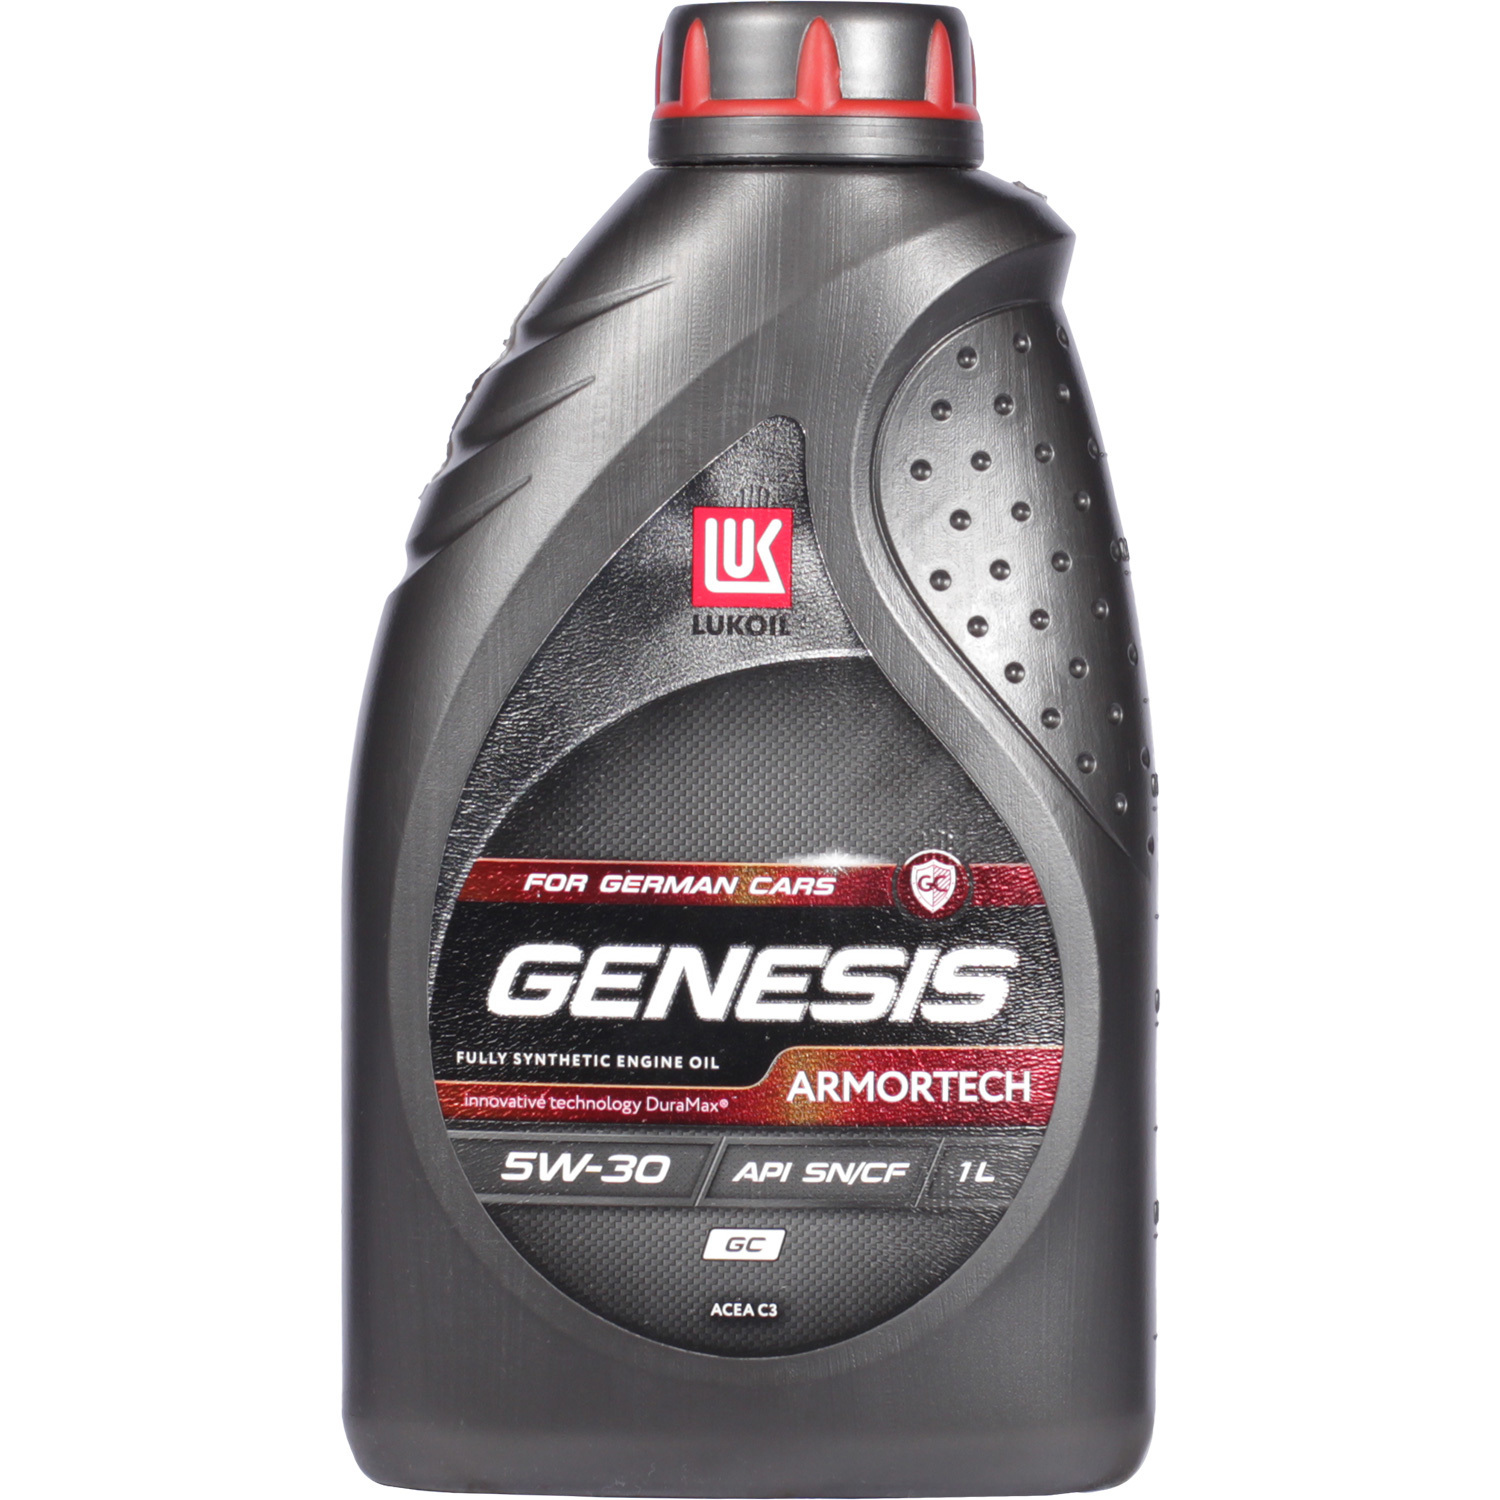 lukoil моторное масло lukoil genesis armortech 5w 40 1 л Lukoil Моторное масло Lukoil Genesis Armortech GC 5W-30, 1 л